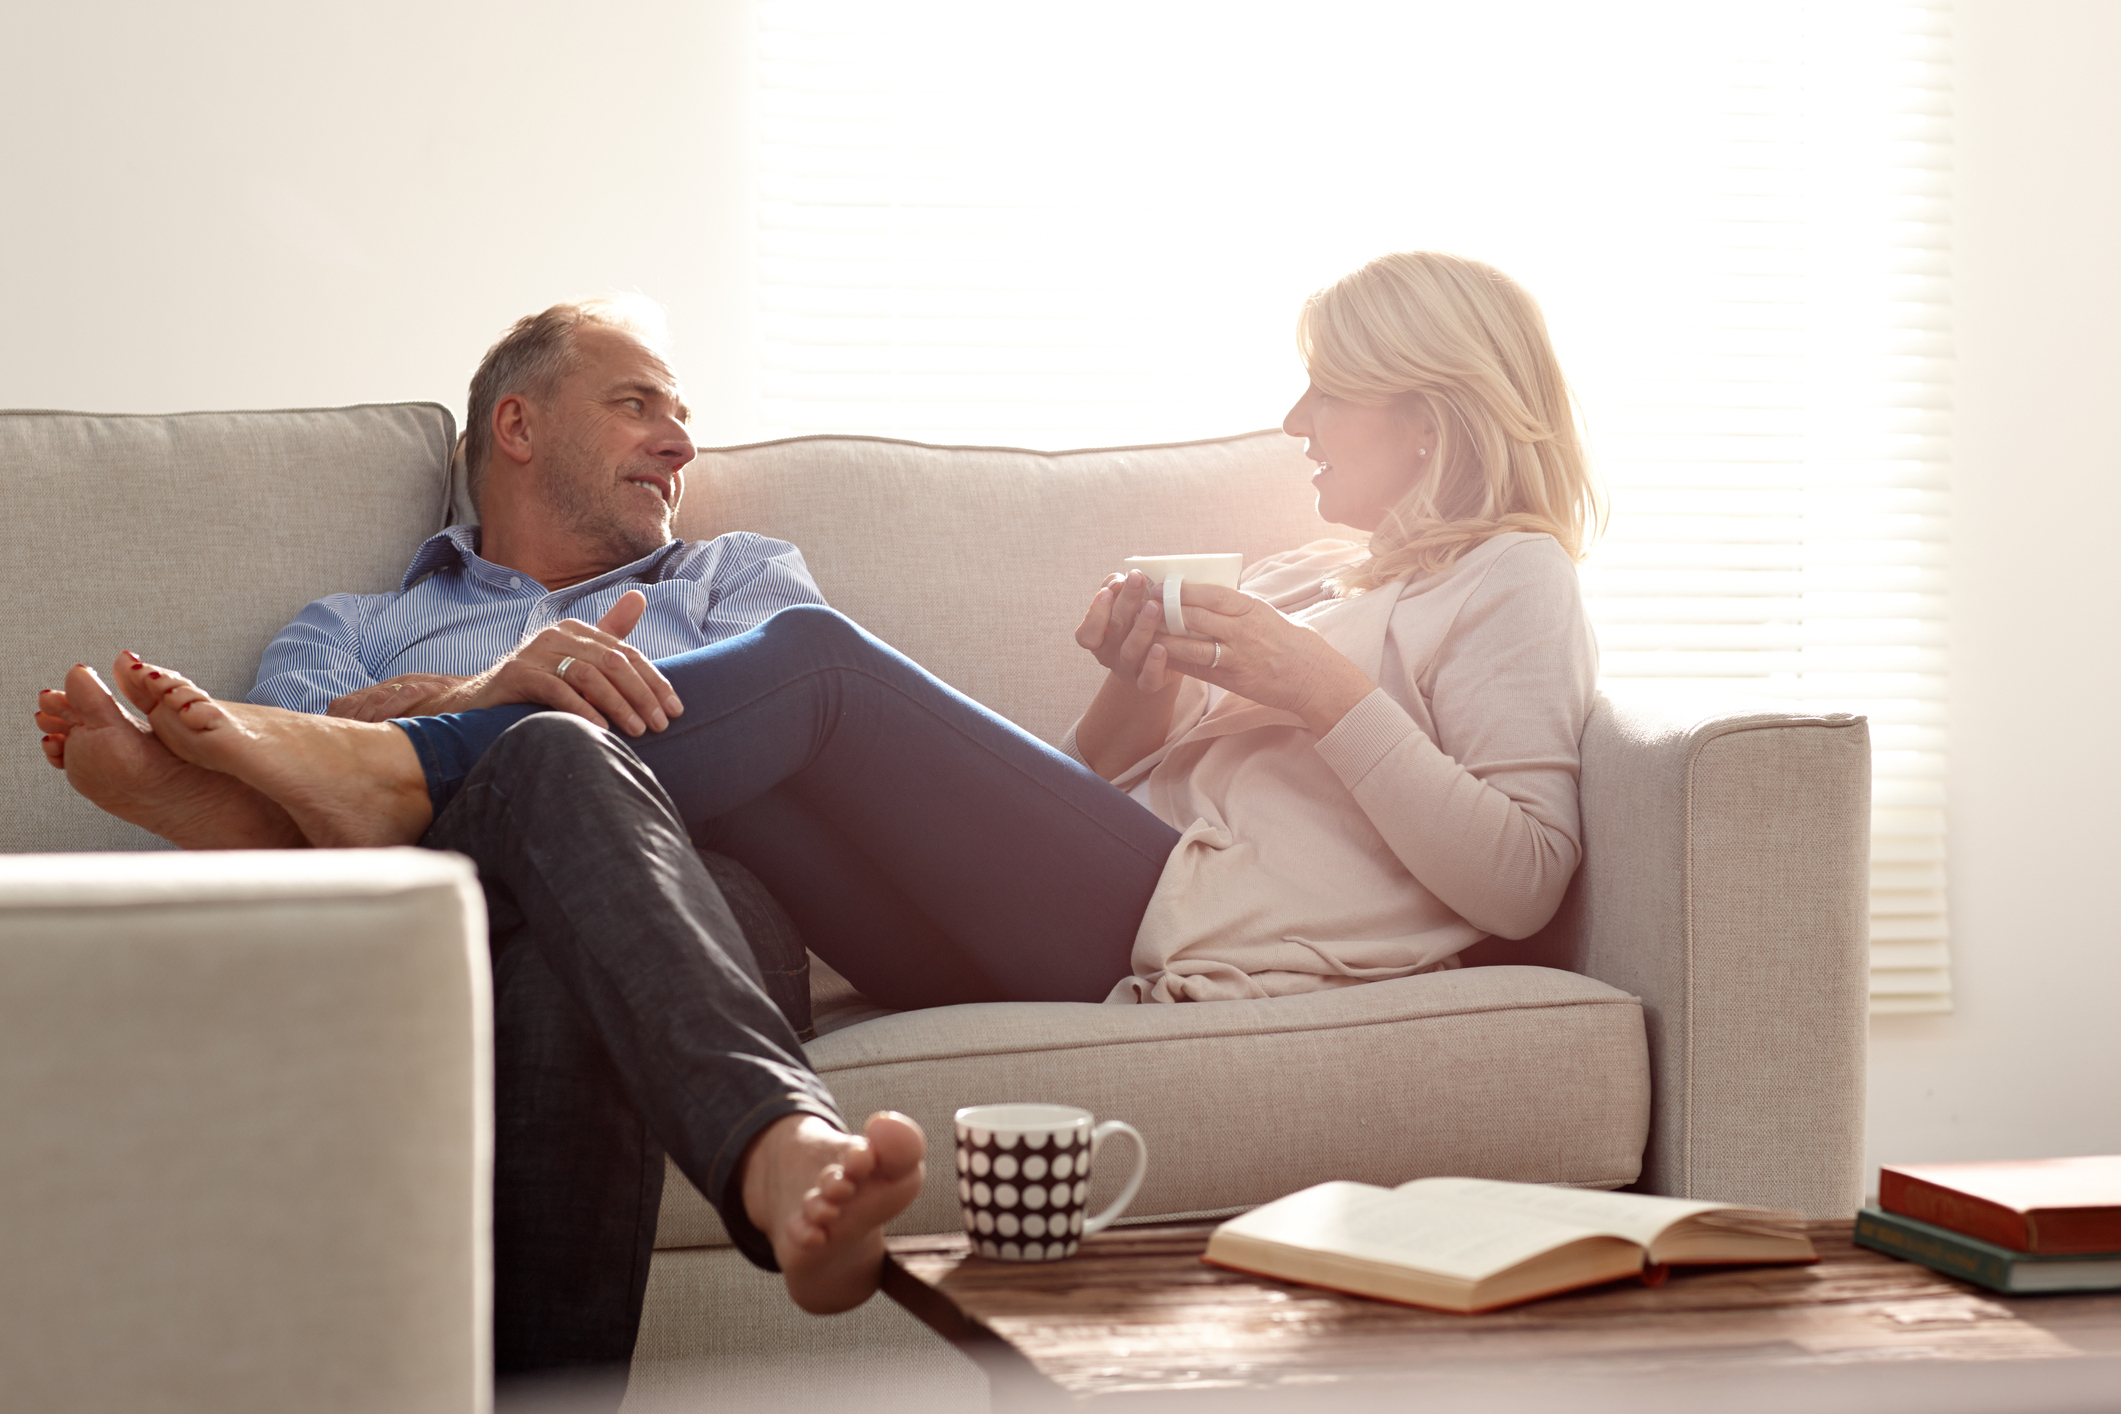 Smiling mature man and woman sitting together on sofa talking in living